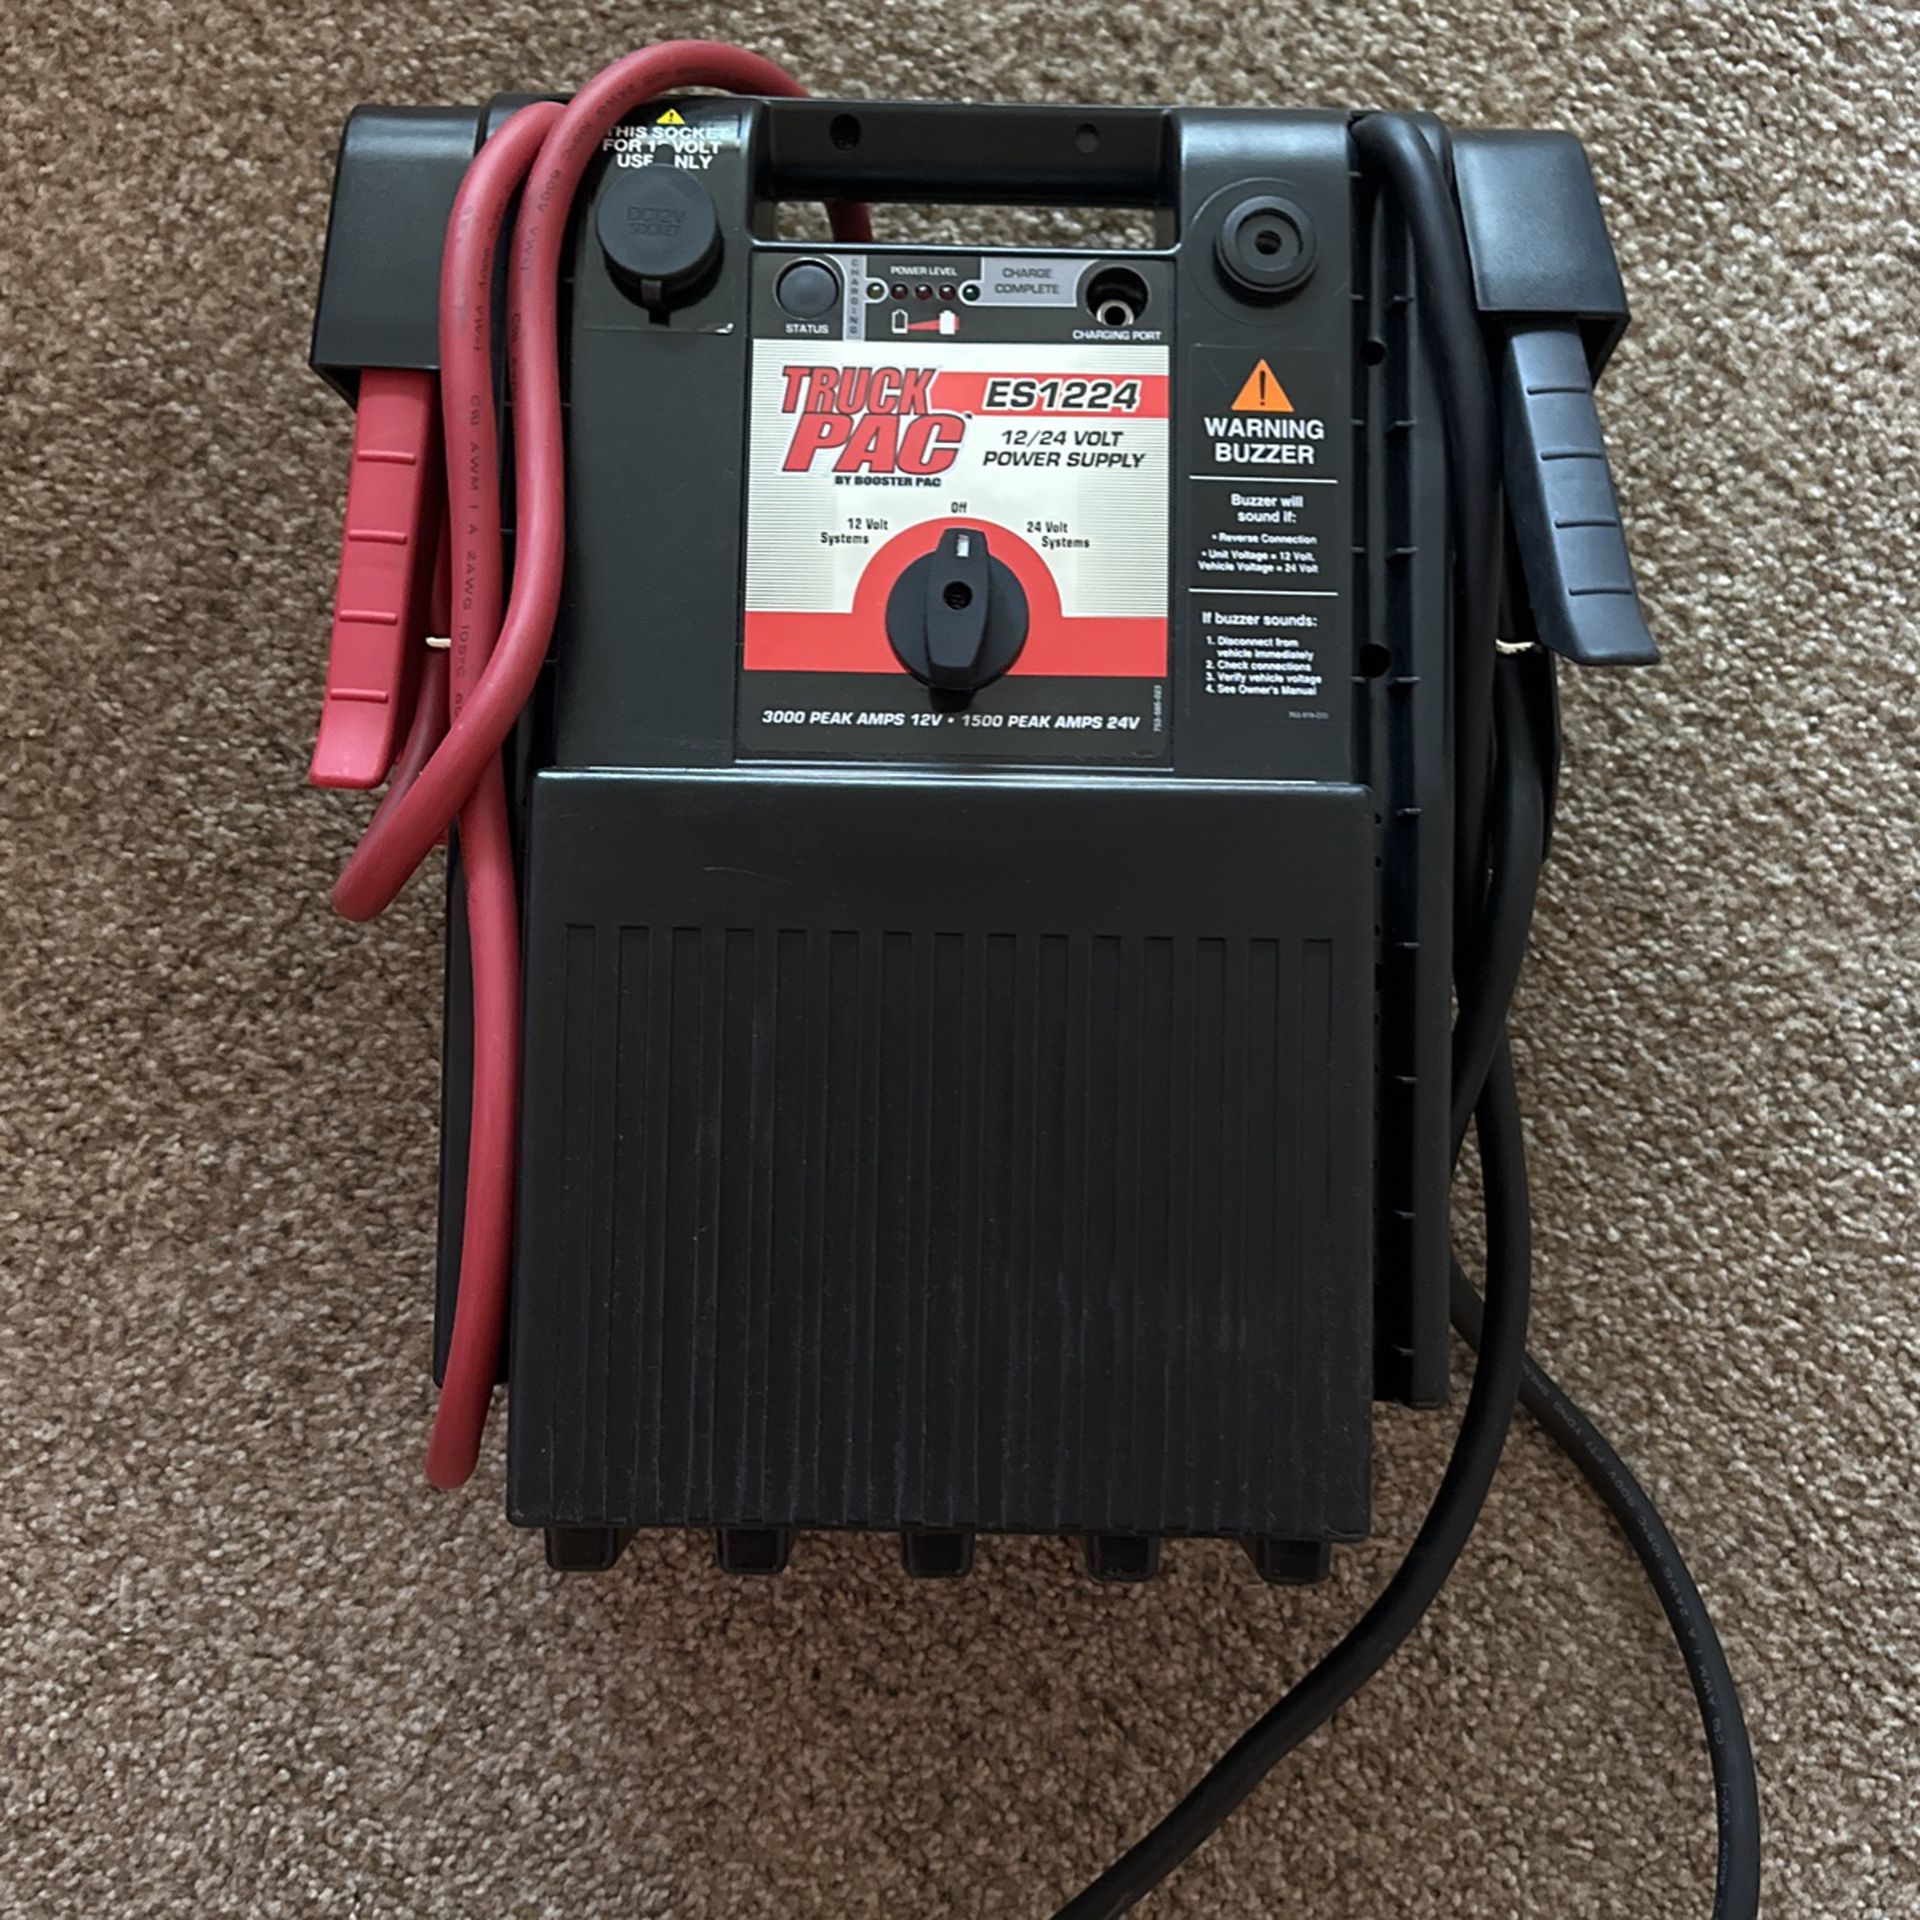 Truck PAC ES1224 Jump Starter for Sale in Portland, OR - OfferUp